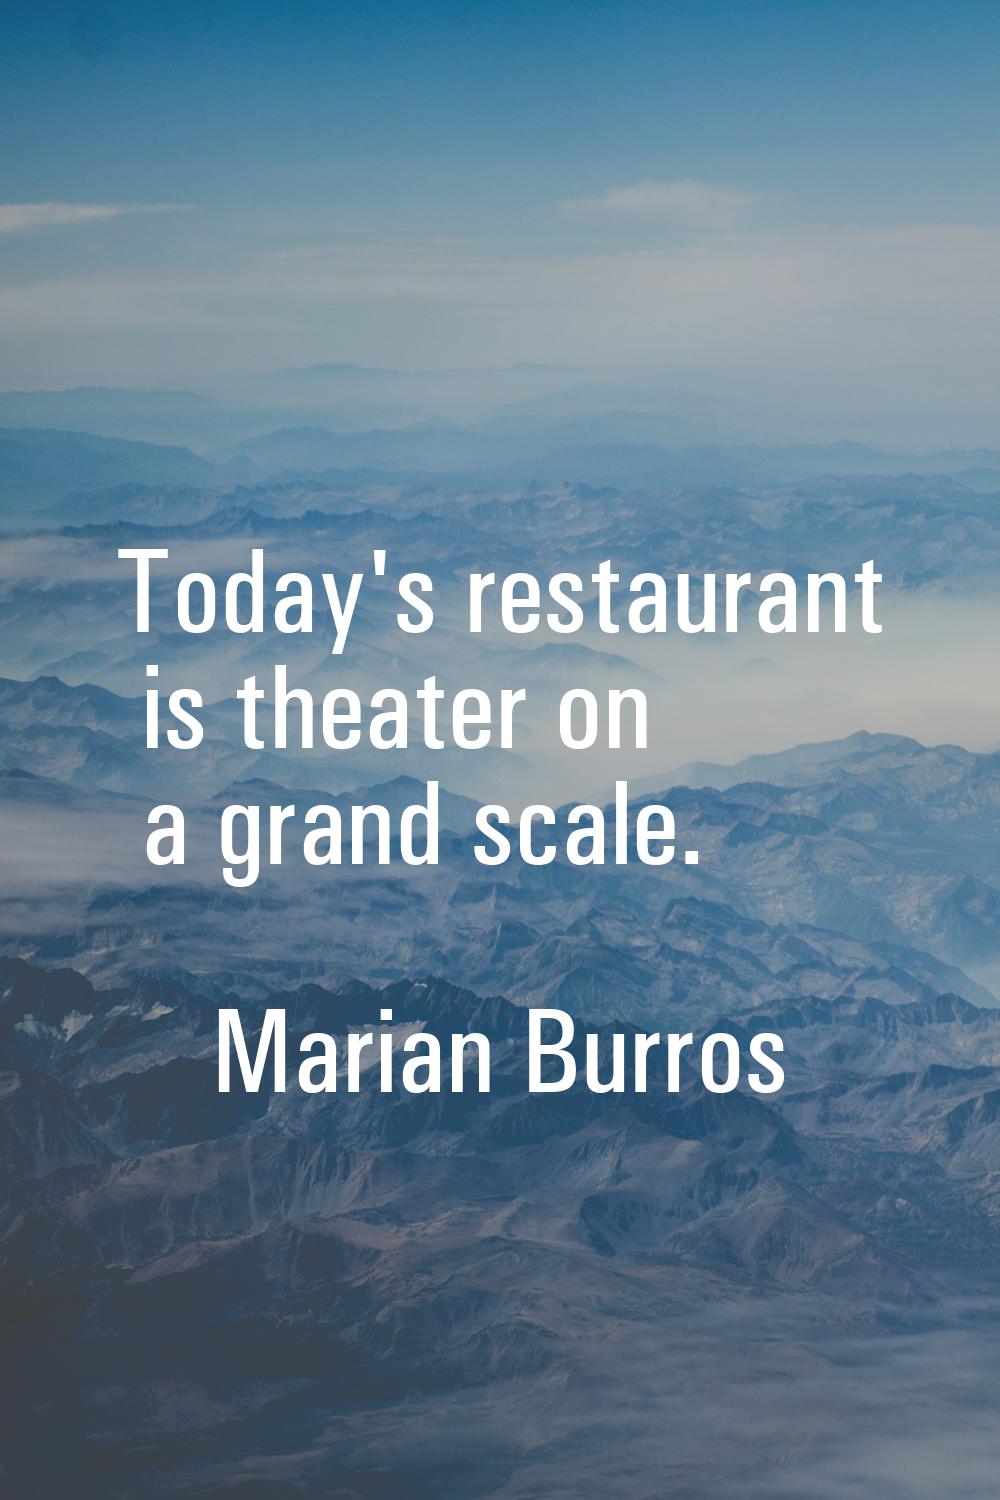 Today's restaurant is theater on a grand scale.